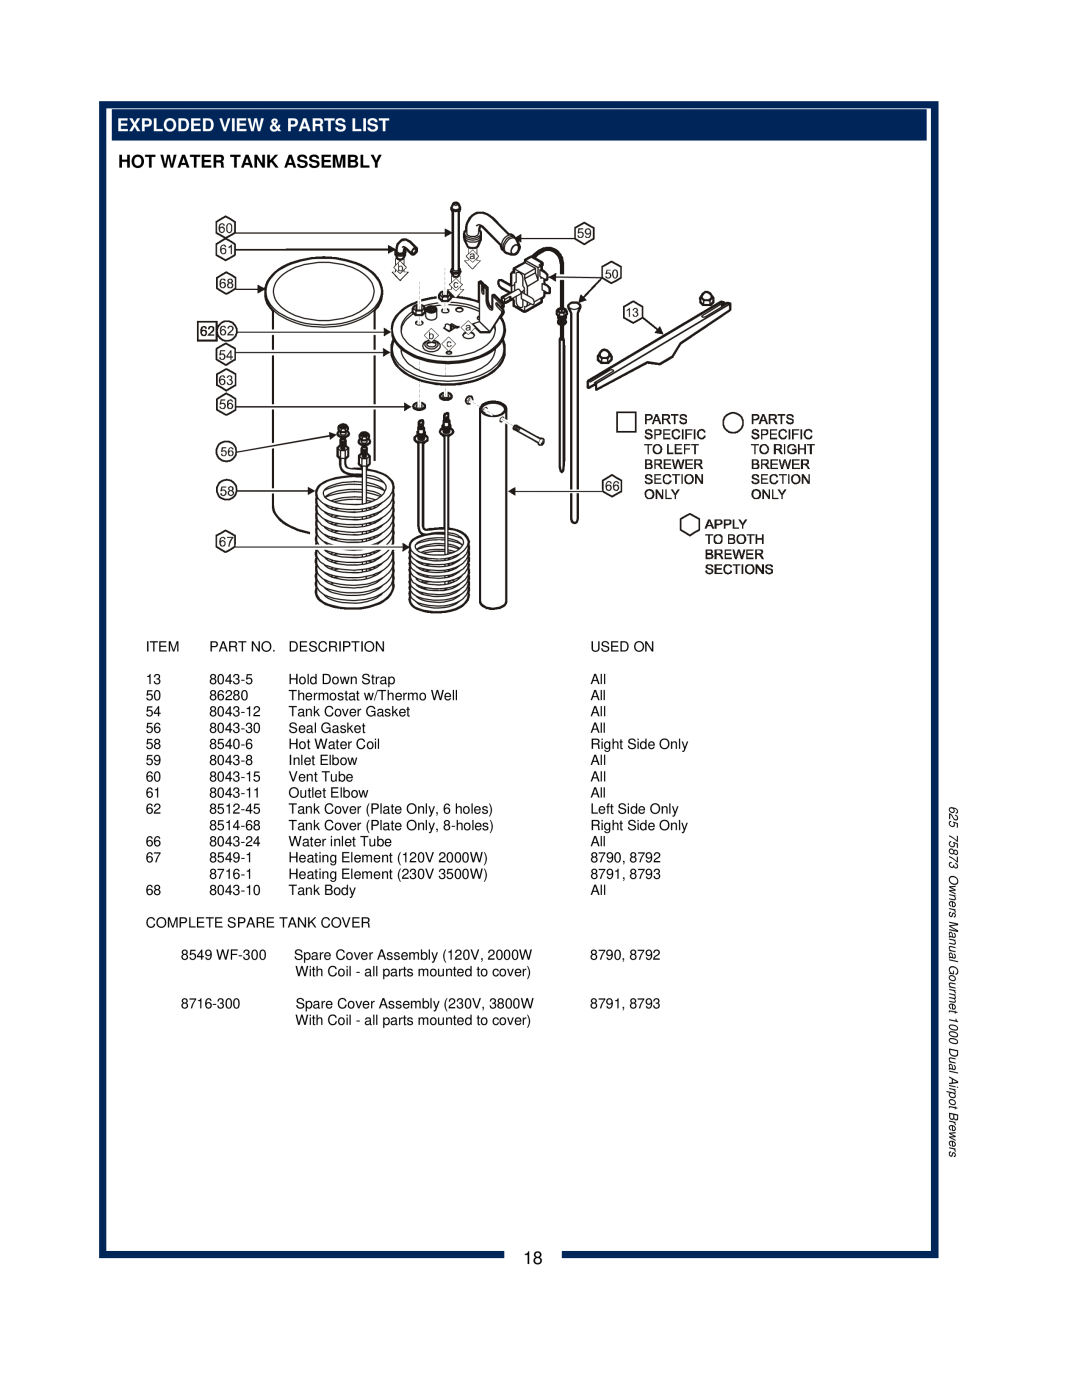 Bloomfield 8792 owner manual Hot Water Tank Assembly 